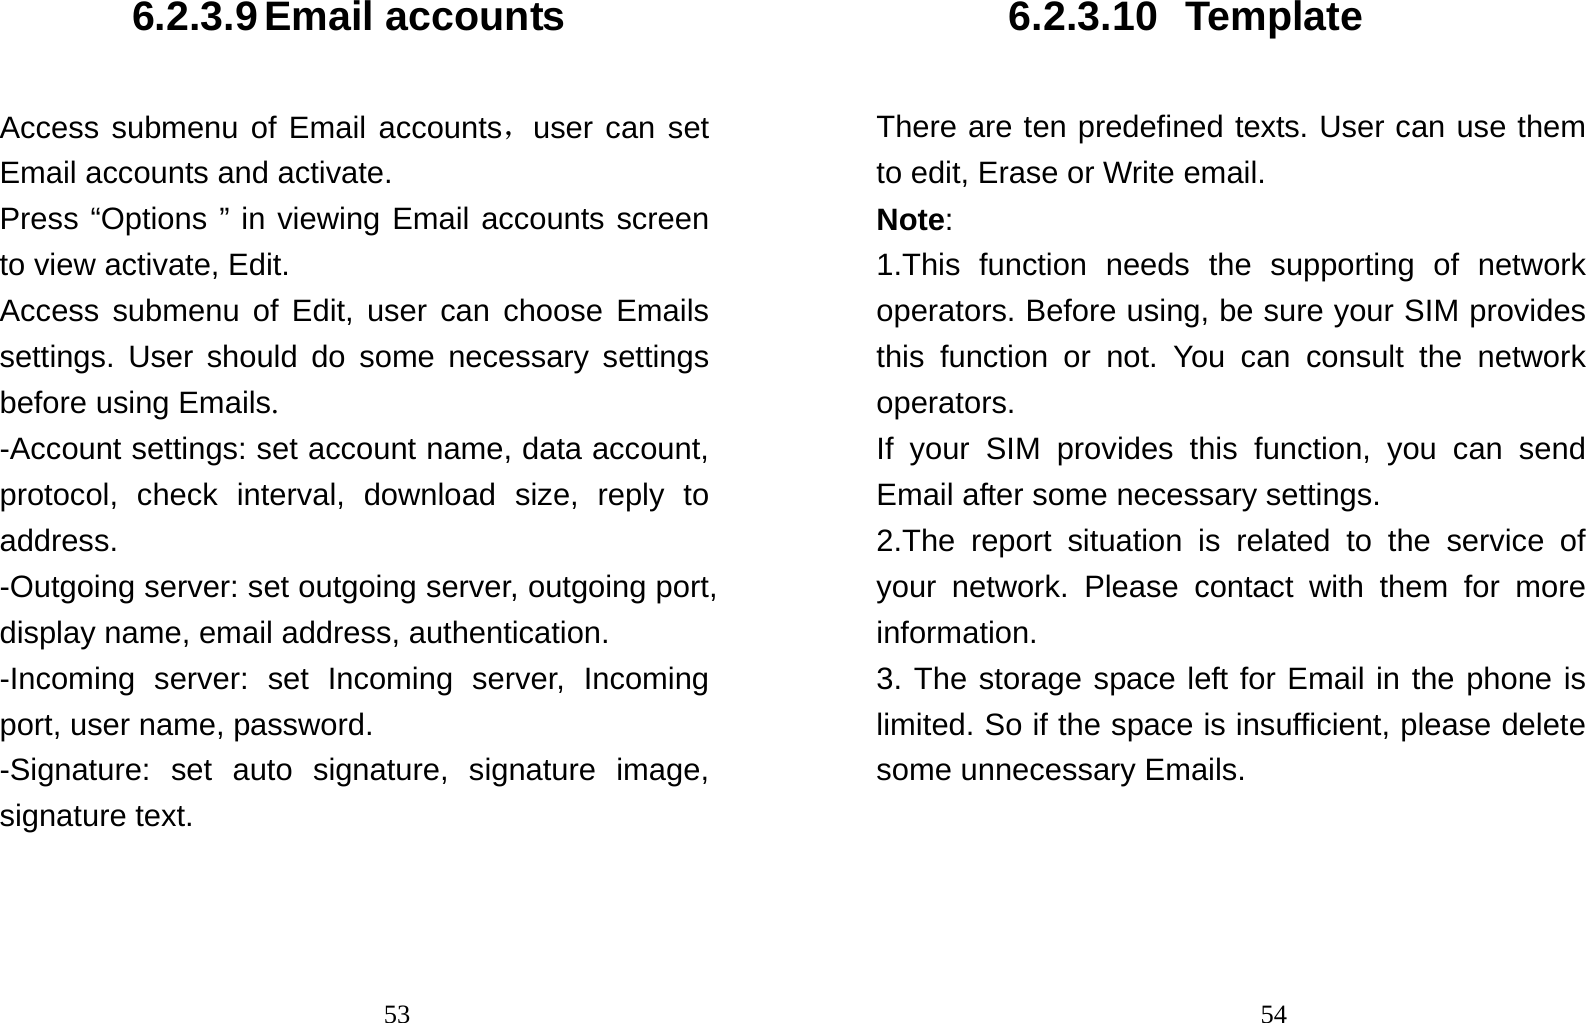                                536.2.3.9 Email accounts Access submenu of Email accounts，user can set Email accounts and activate. Press “Options ” in viewing Email accounts screen to view activate, Edit. Access submenu of Edit, user can choose Emails settings. User should do some necessary settings before using Emails. -Account settings: set account name, data account, protocol, check interval, download size, reply to address. -Outgoing server: set outgoing server, outgoing port, display name, email address, authentication. -Incoming server: set Incoming server, Incoming port, user name, password. -Signature: set auto signature, signature image, signature text.                                546.2.3.10 Template There are ten predefined texts. User can use them to edit, Erase or Write email. Note:  1.This function needs the supporting of network operators. Before using, be sure your SIM provides this function or not. You can consult the network operators. If your SIM provides this function, you can send Email after some necessary settings. 2.The report situation is related to the service of your network. Please contact with them for more information. 3. The storage space left for Email in the phone is limited. So if the space is insufficient, please delete some unnecessary Emails. 